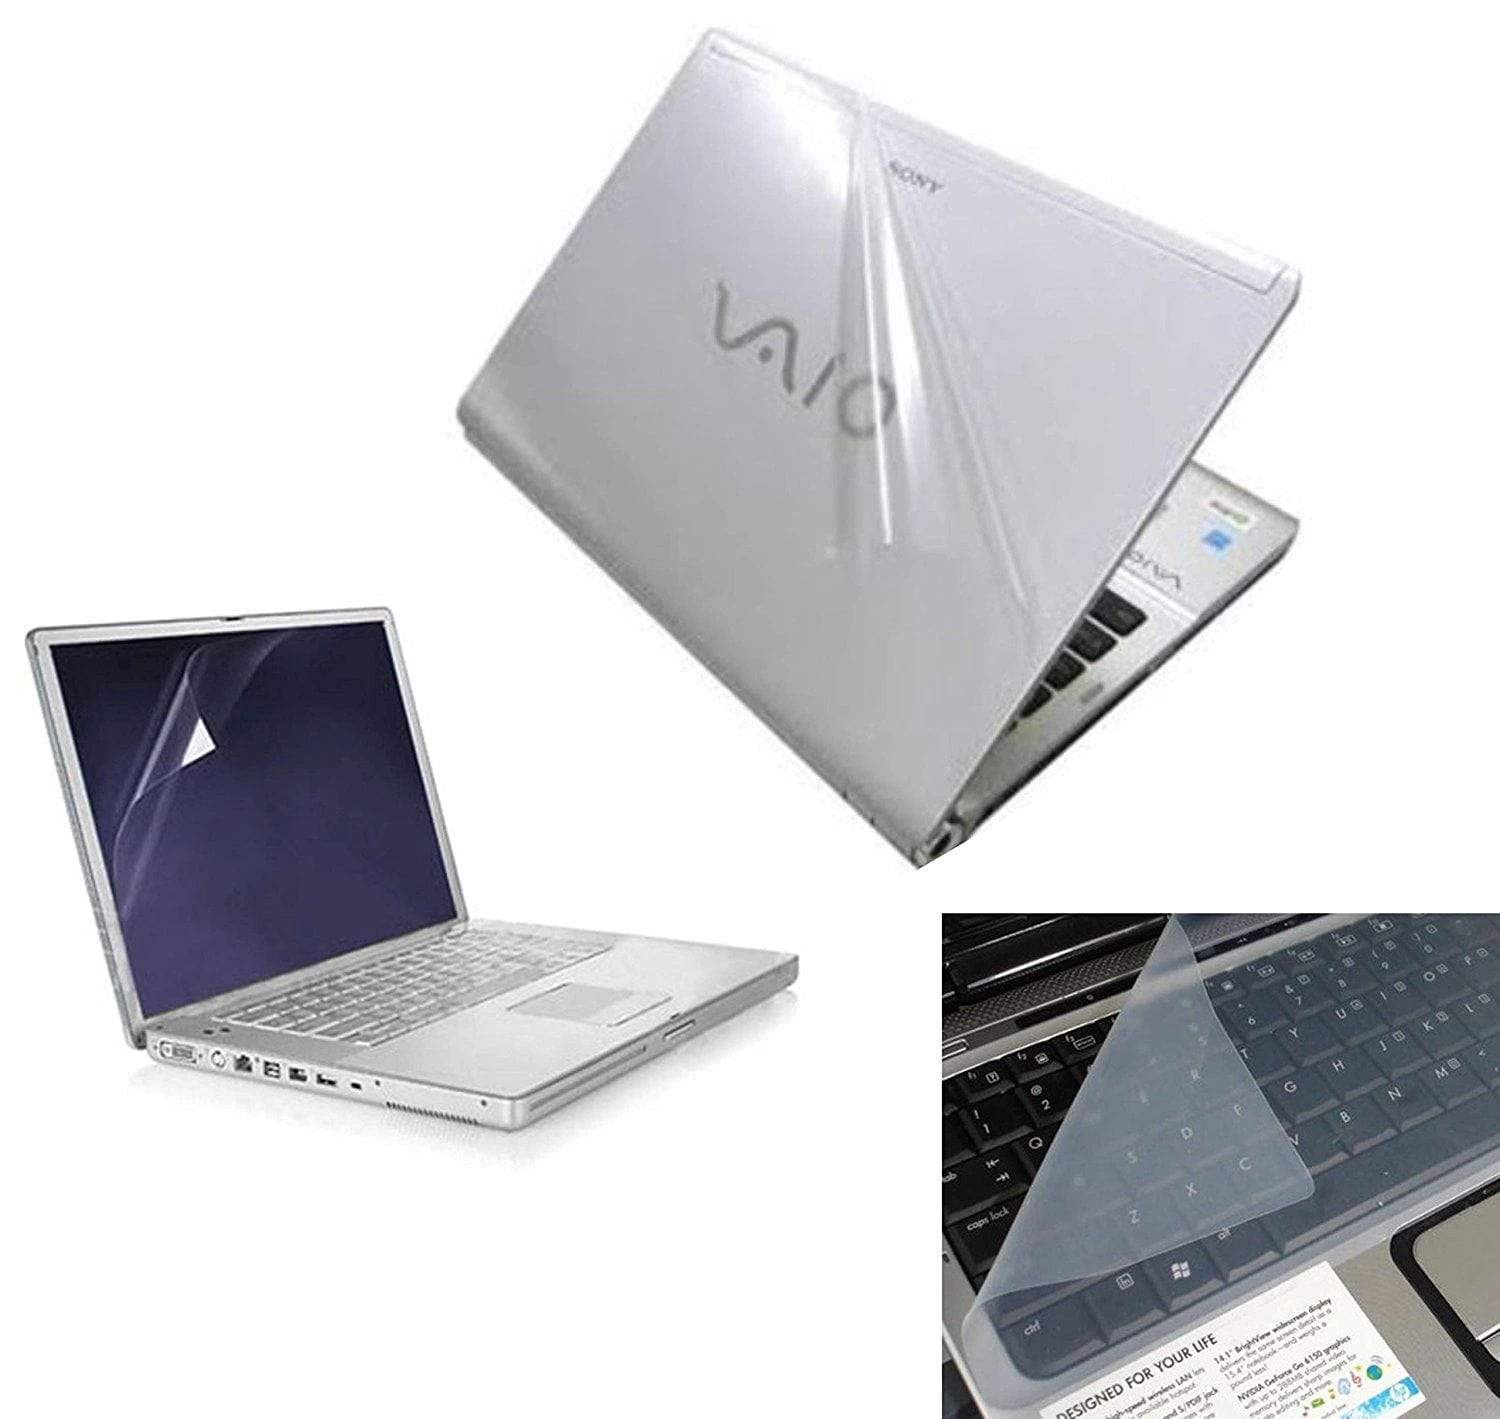 Yashi 15.6" Laptop Skin Combo 3 in 1 For keyboard, Display and Laptop lid-Laptops & Computer Peripherals-dealsplant